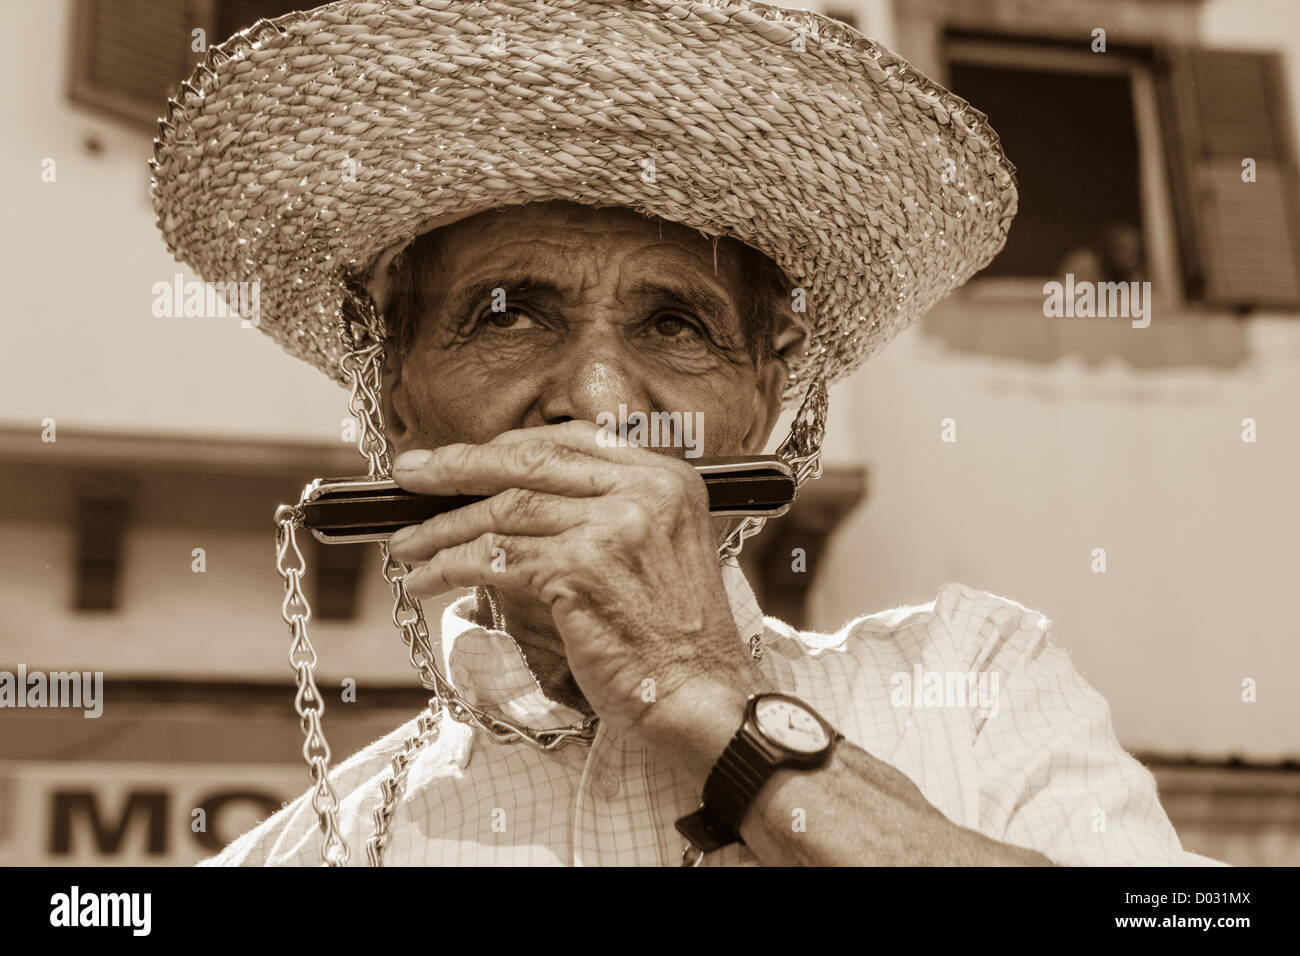 Man playing mouth organ at El Pino fiesta in Teror on Gran Canaria, Canary Islands, Spain Stock Photo